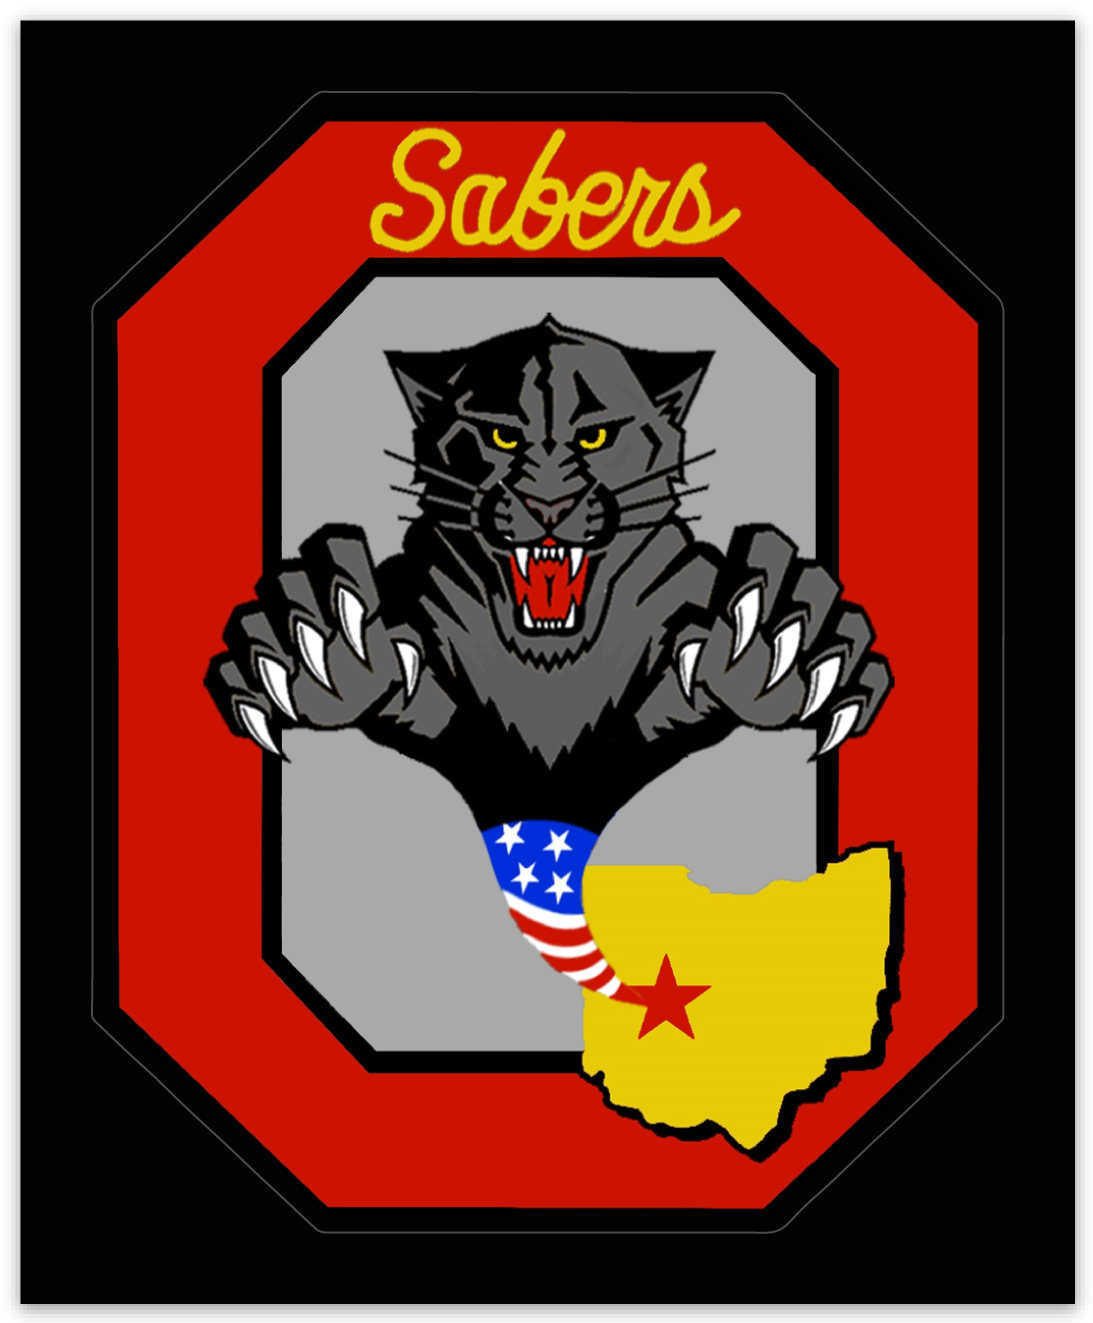 Ohio Air National Guard Sabers - Zap - Reaper Patches